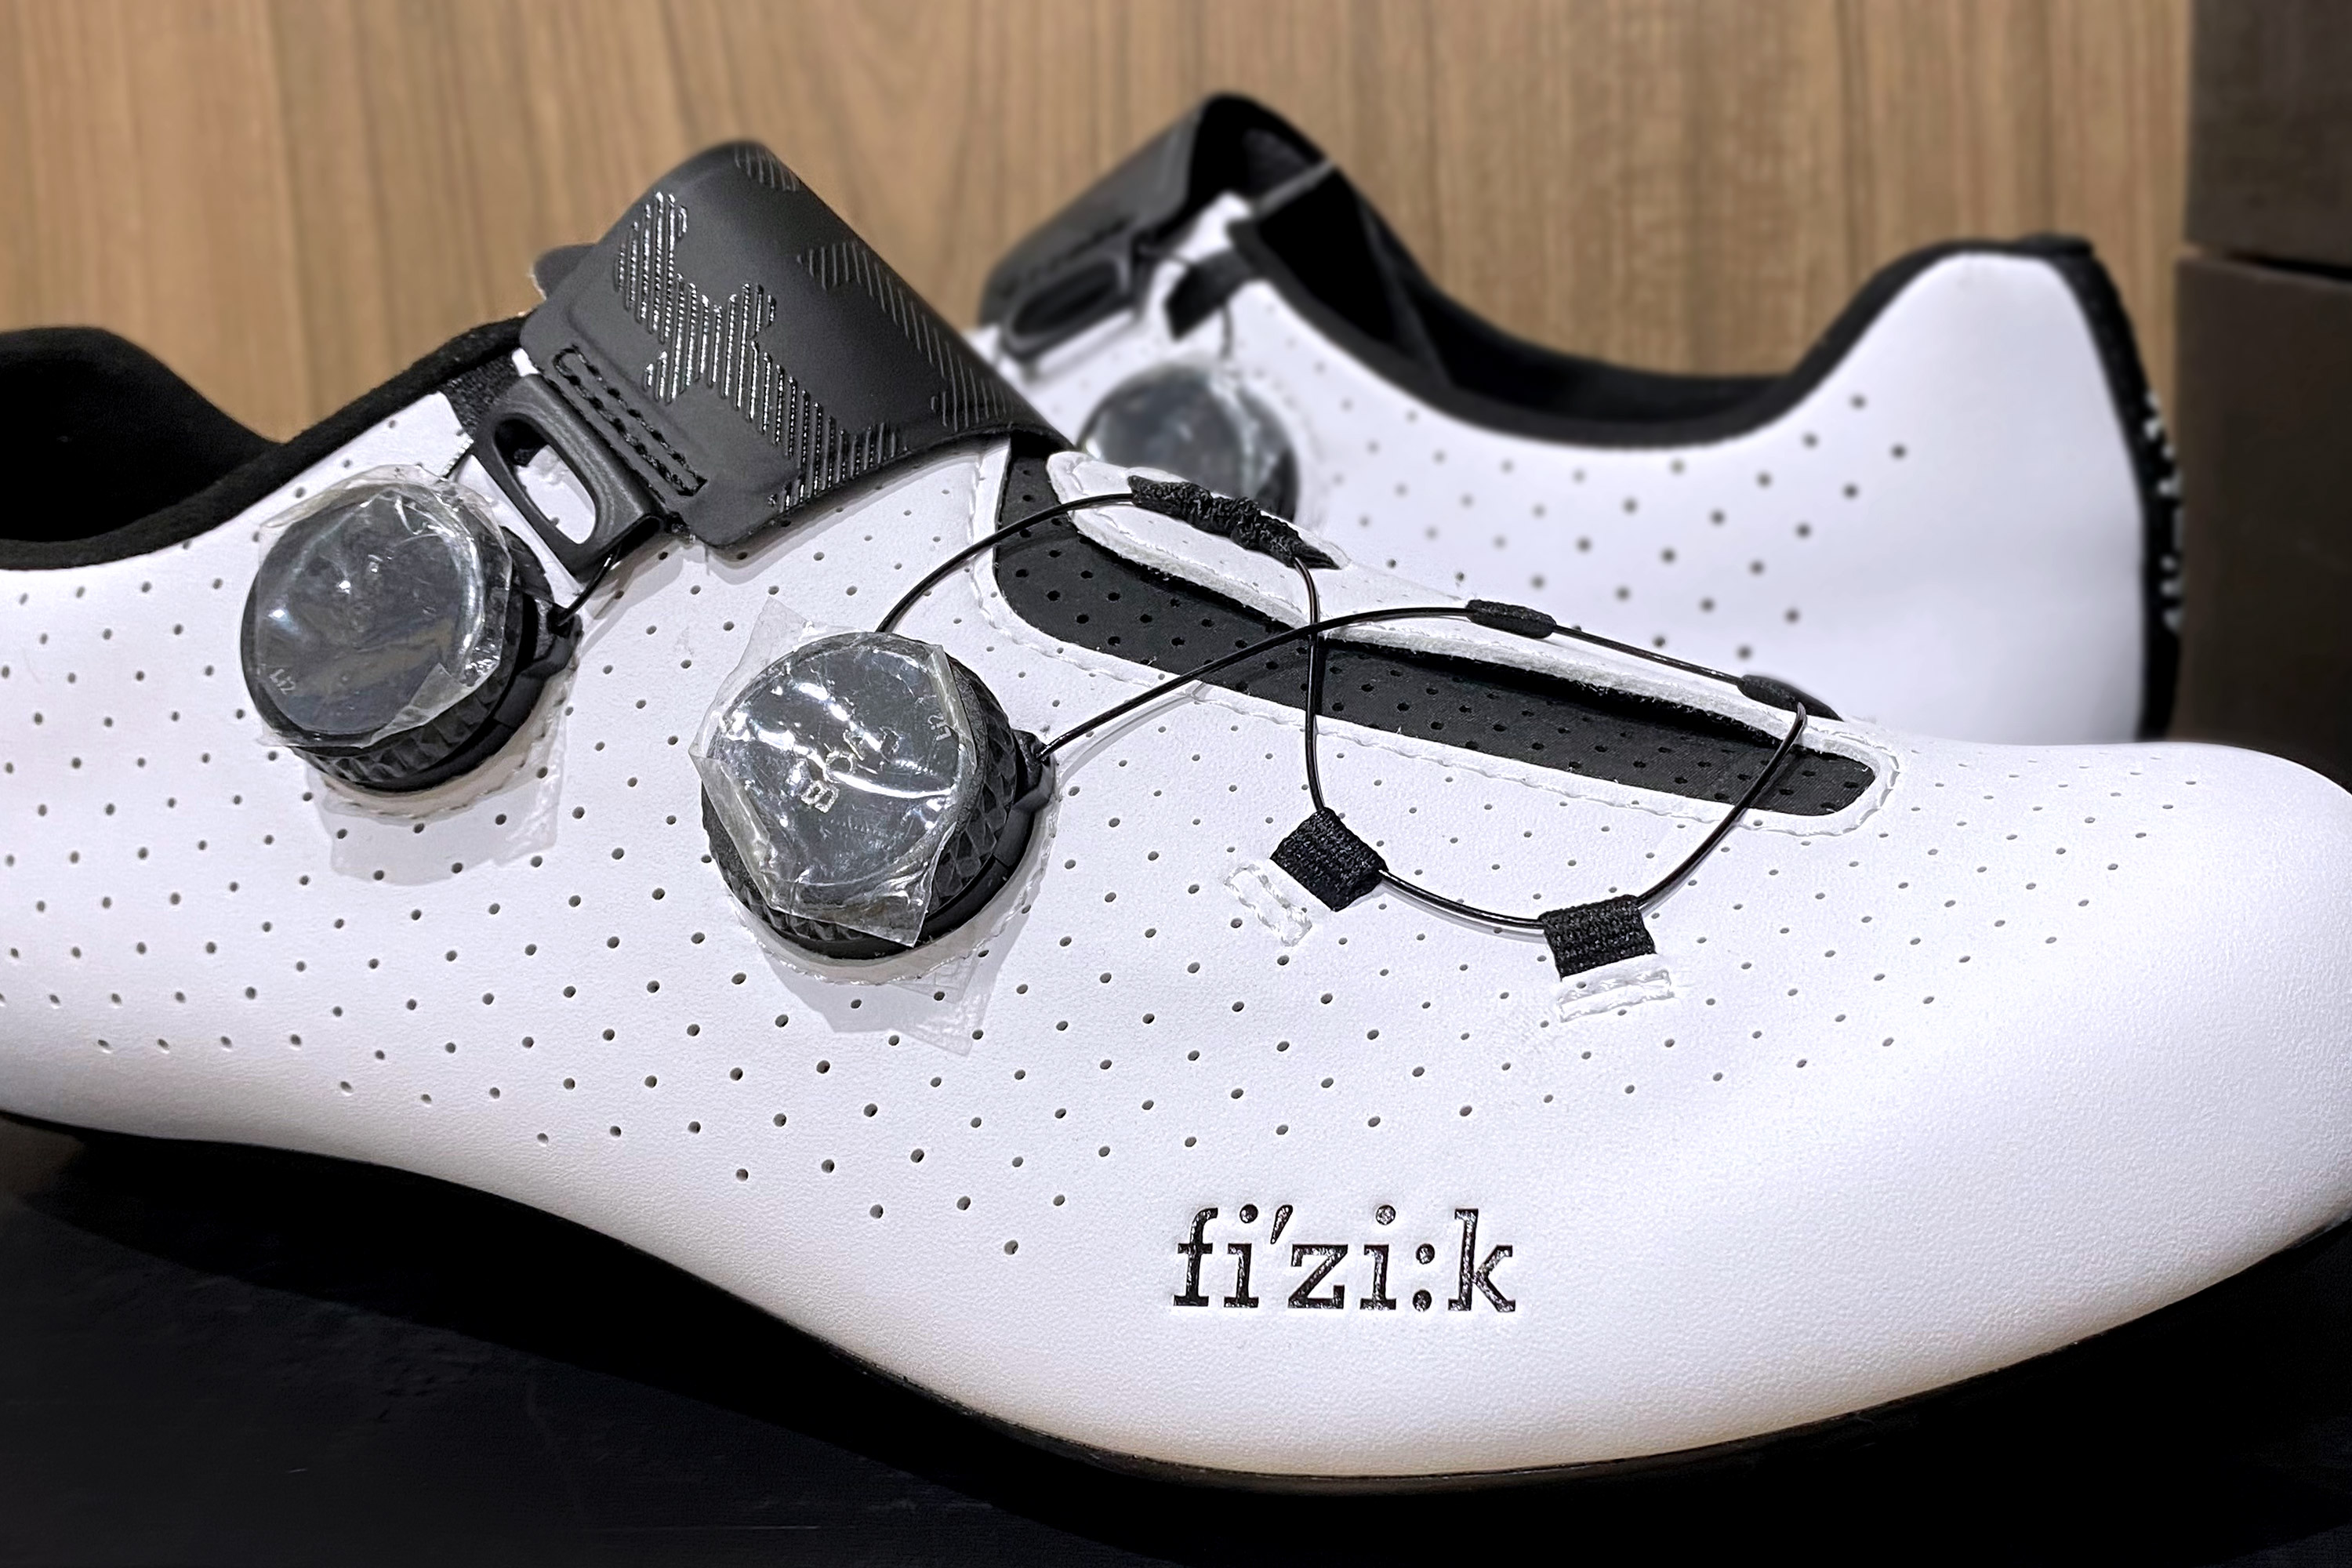 Fizik Vento Infinito Carbon Wide Fit Road Shoes Available Now